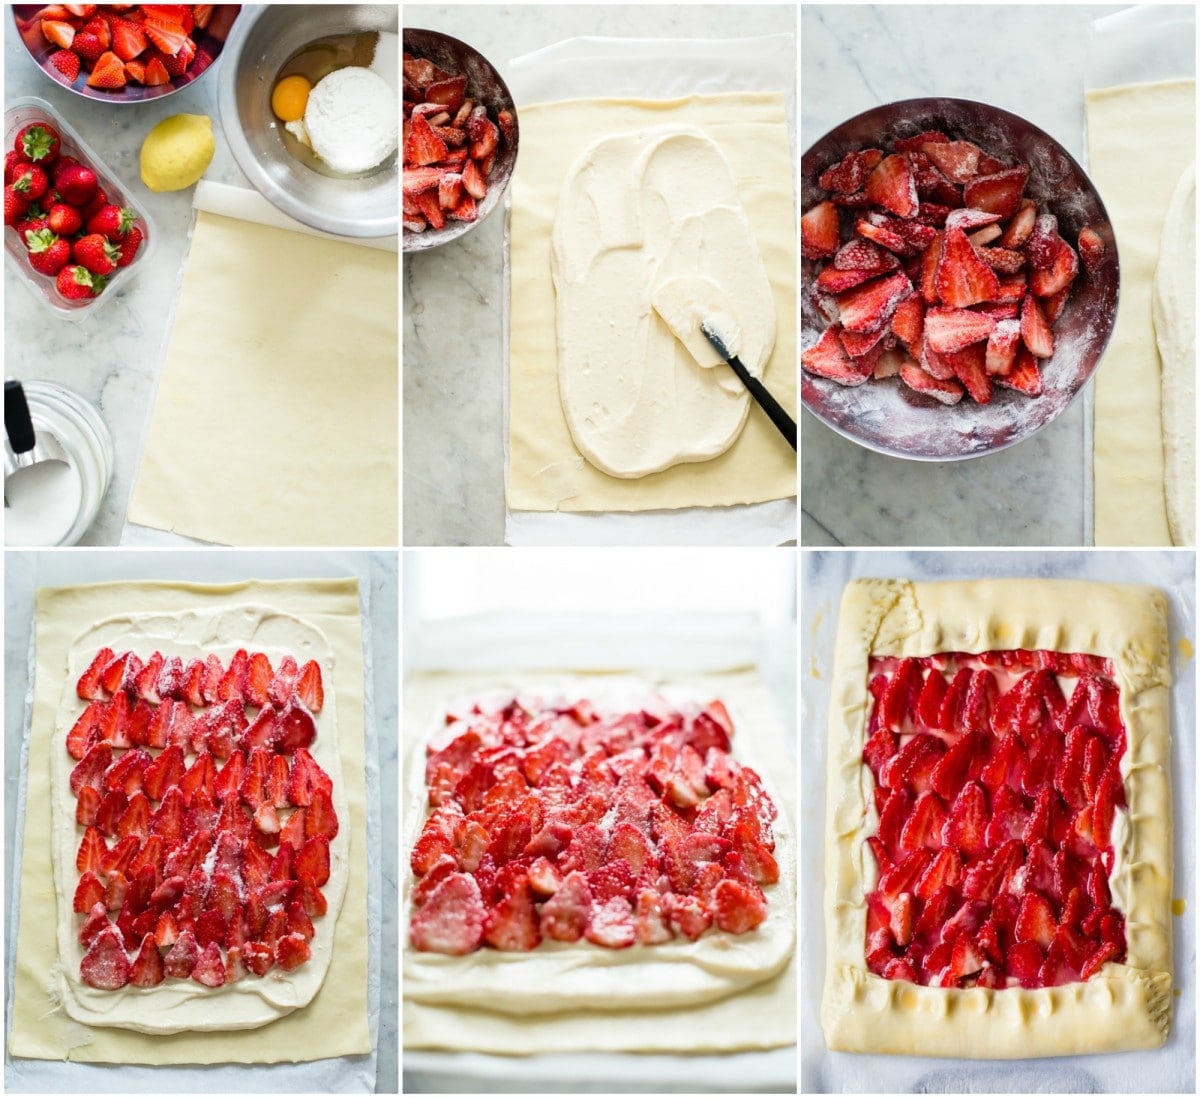 Rustic strawberry and cream cheese galette 